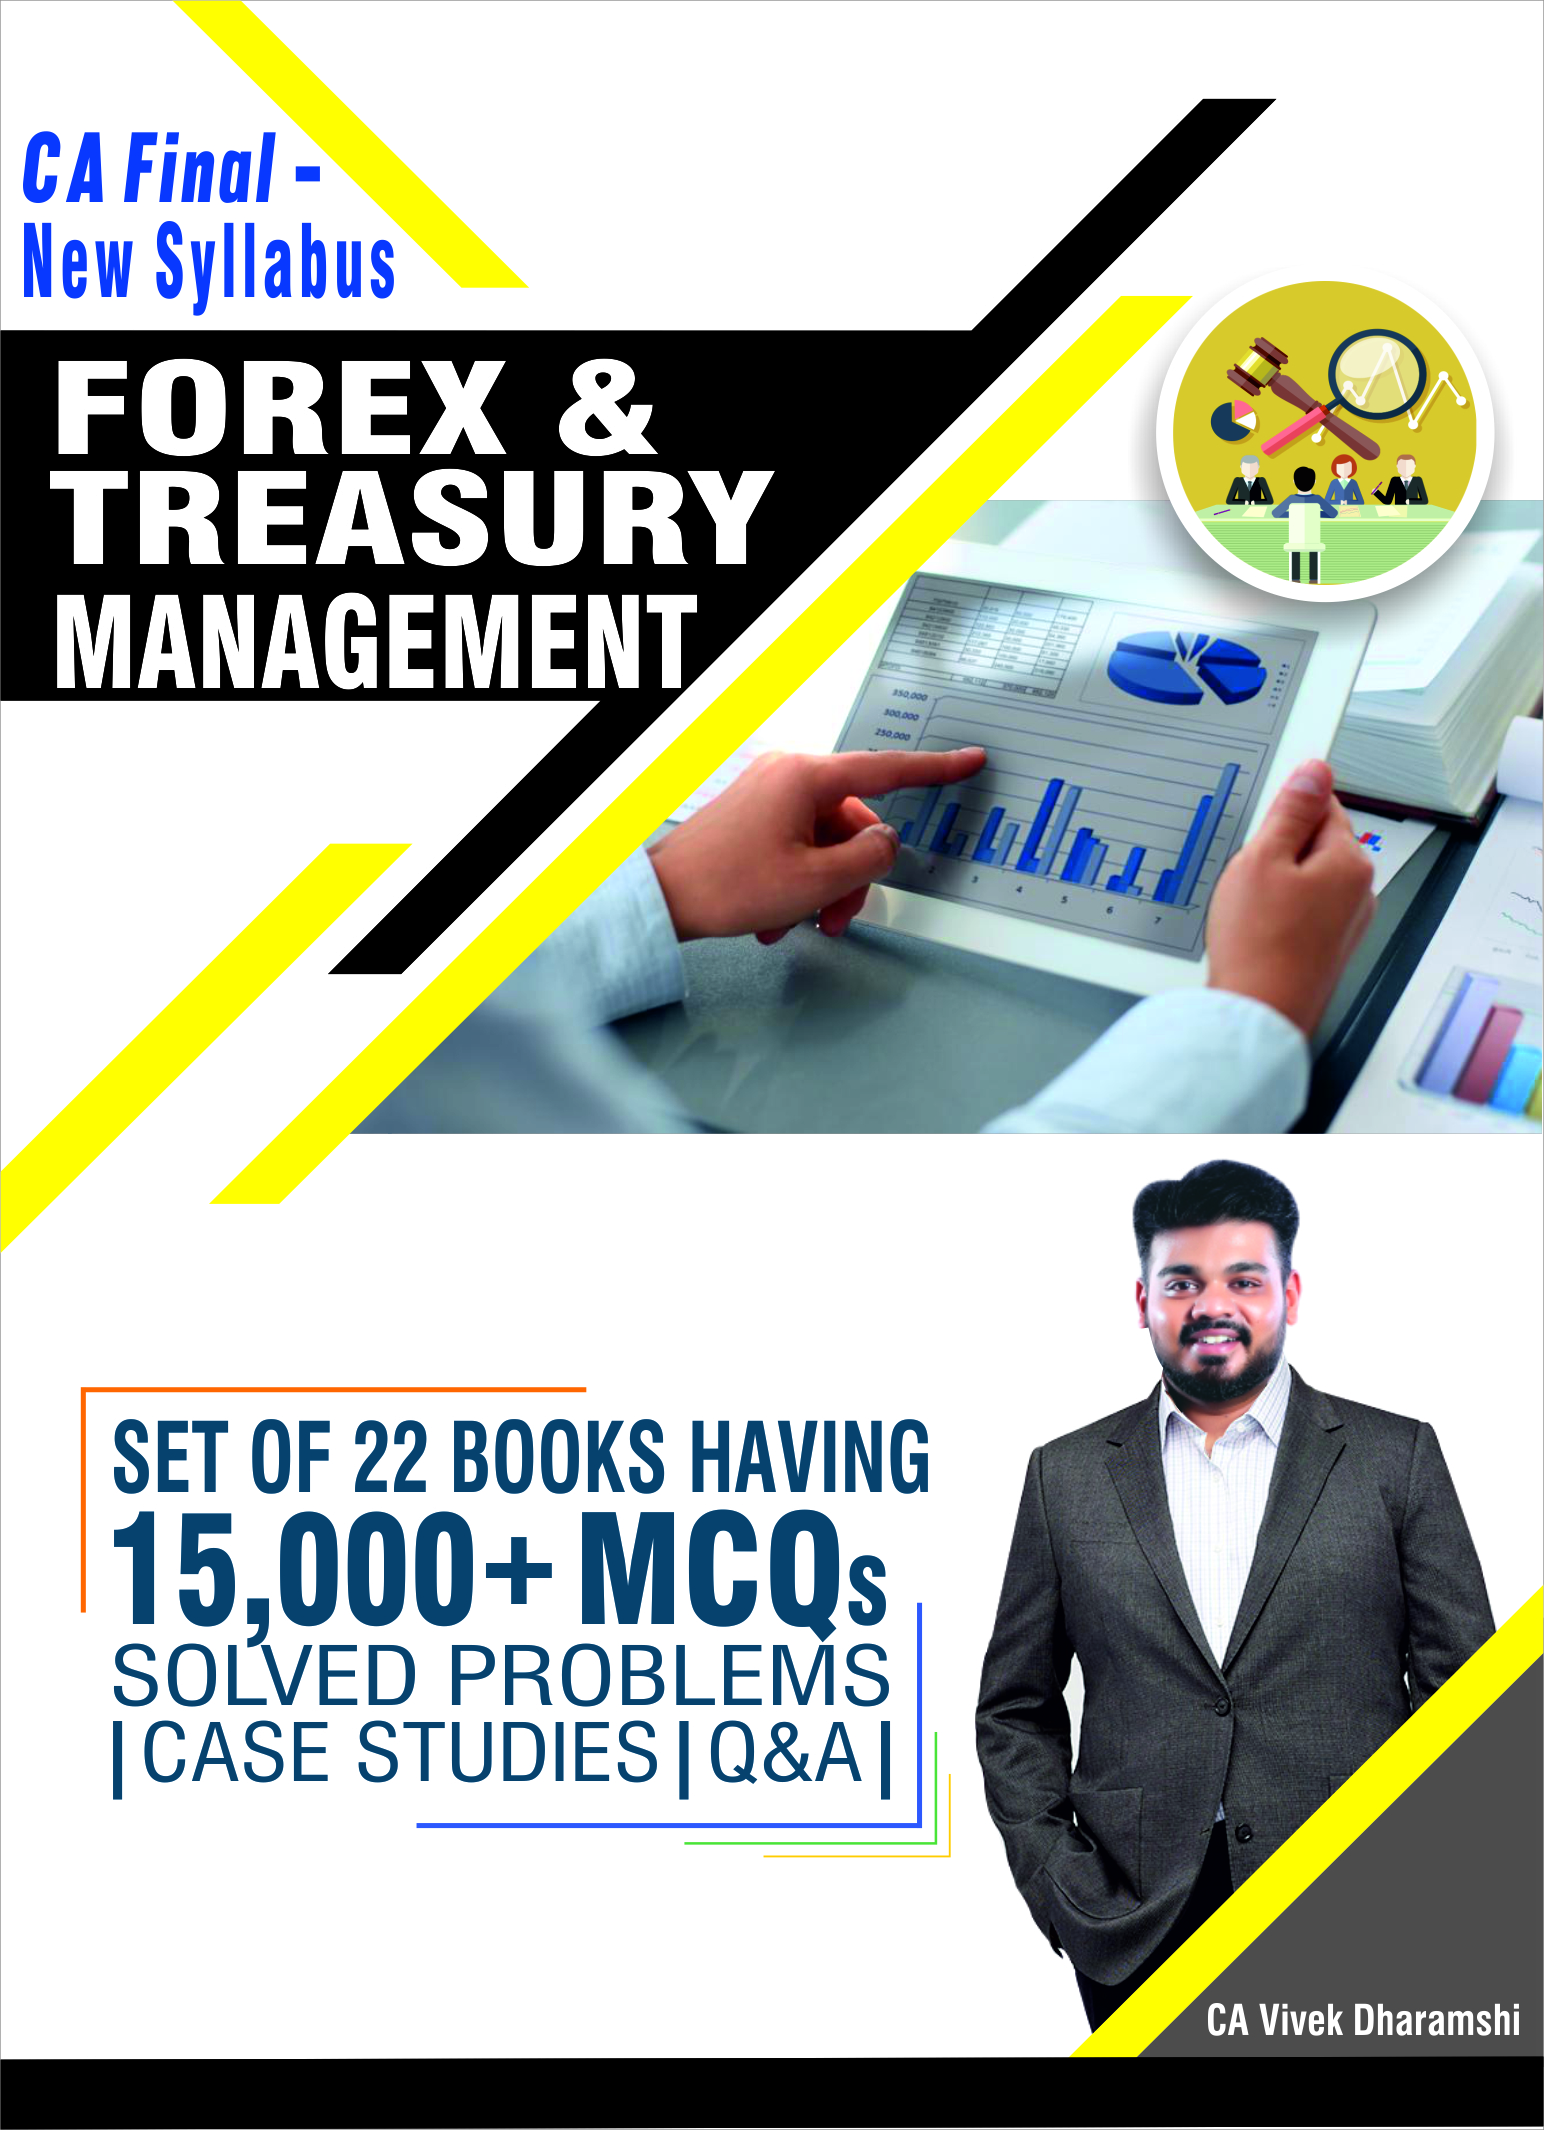 CA_Final_Valuation_Forex_and_Treasury_Management_|_Largest_Question_Bank_in_India_|_Solved_Problems_andd_Case_Studies_QanddA